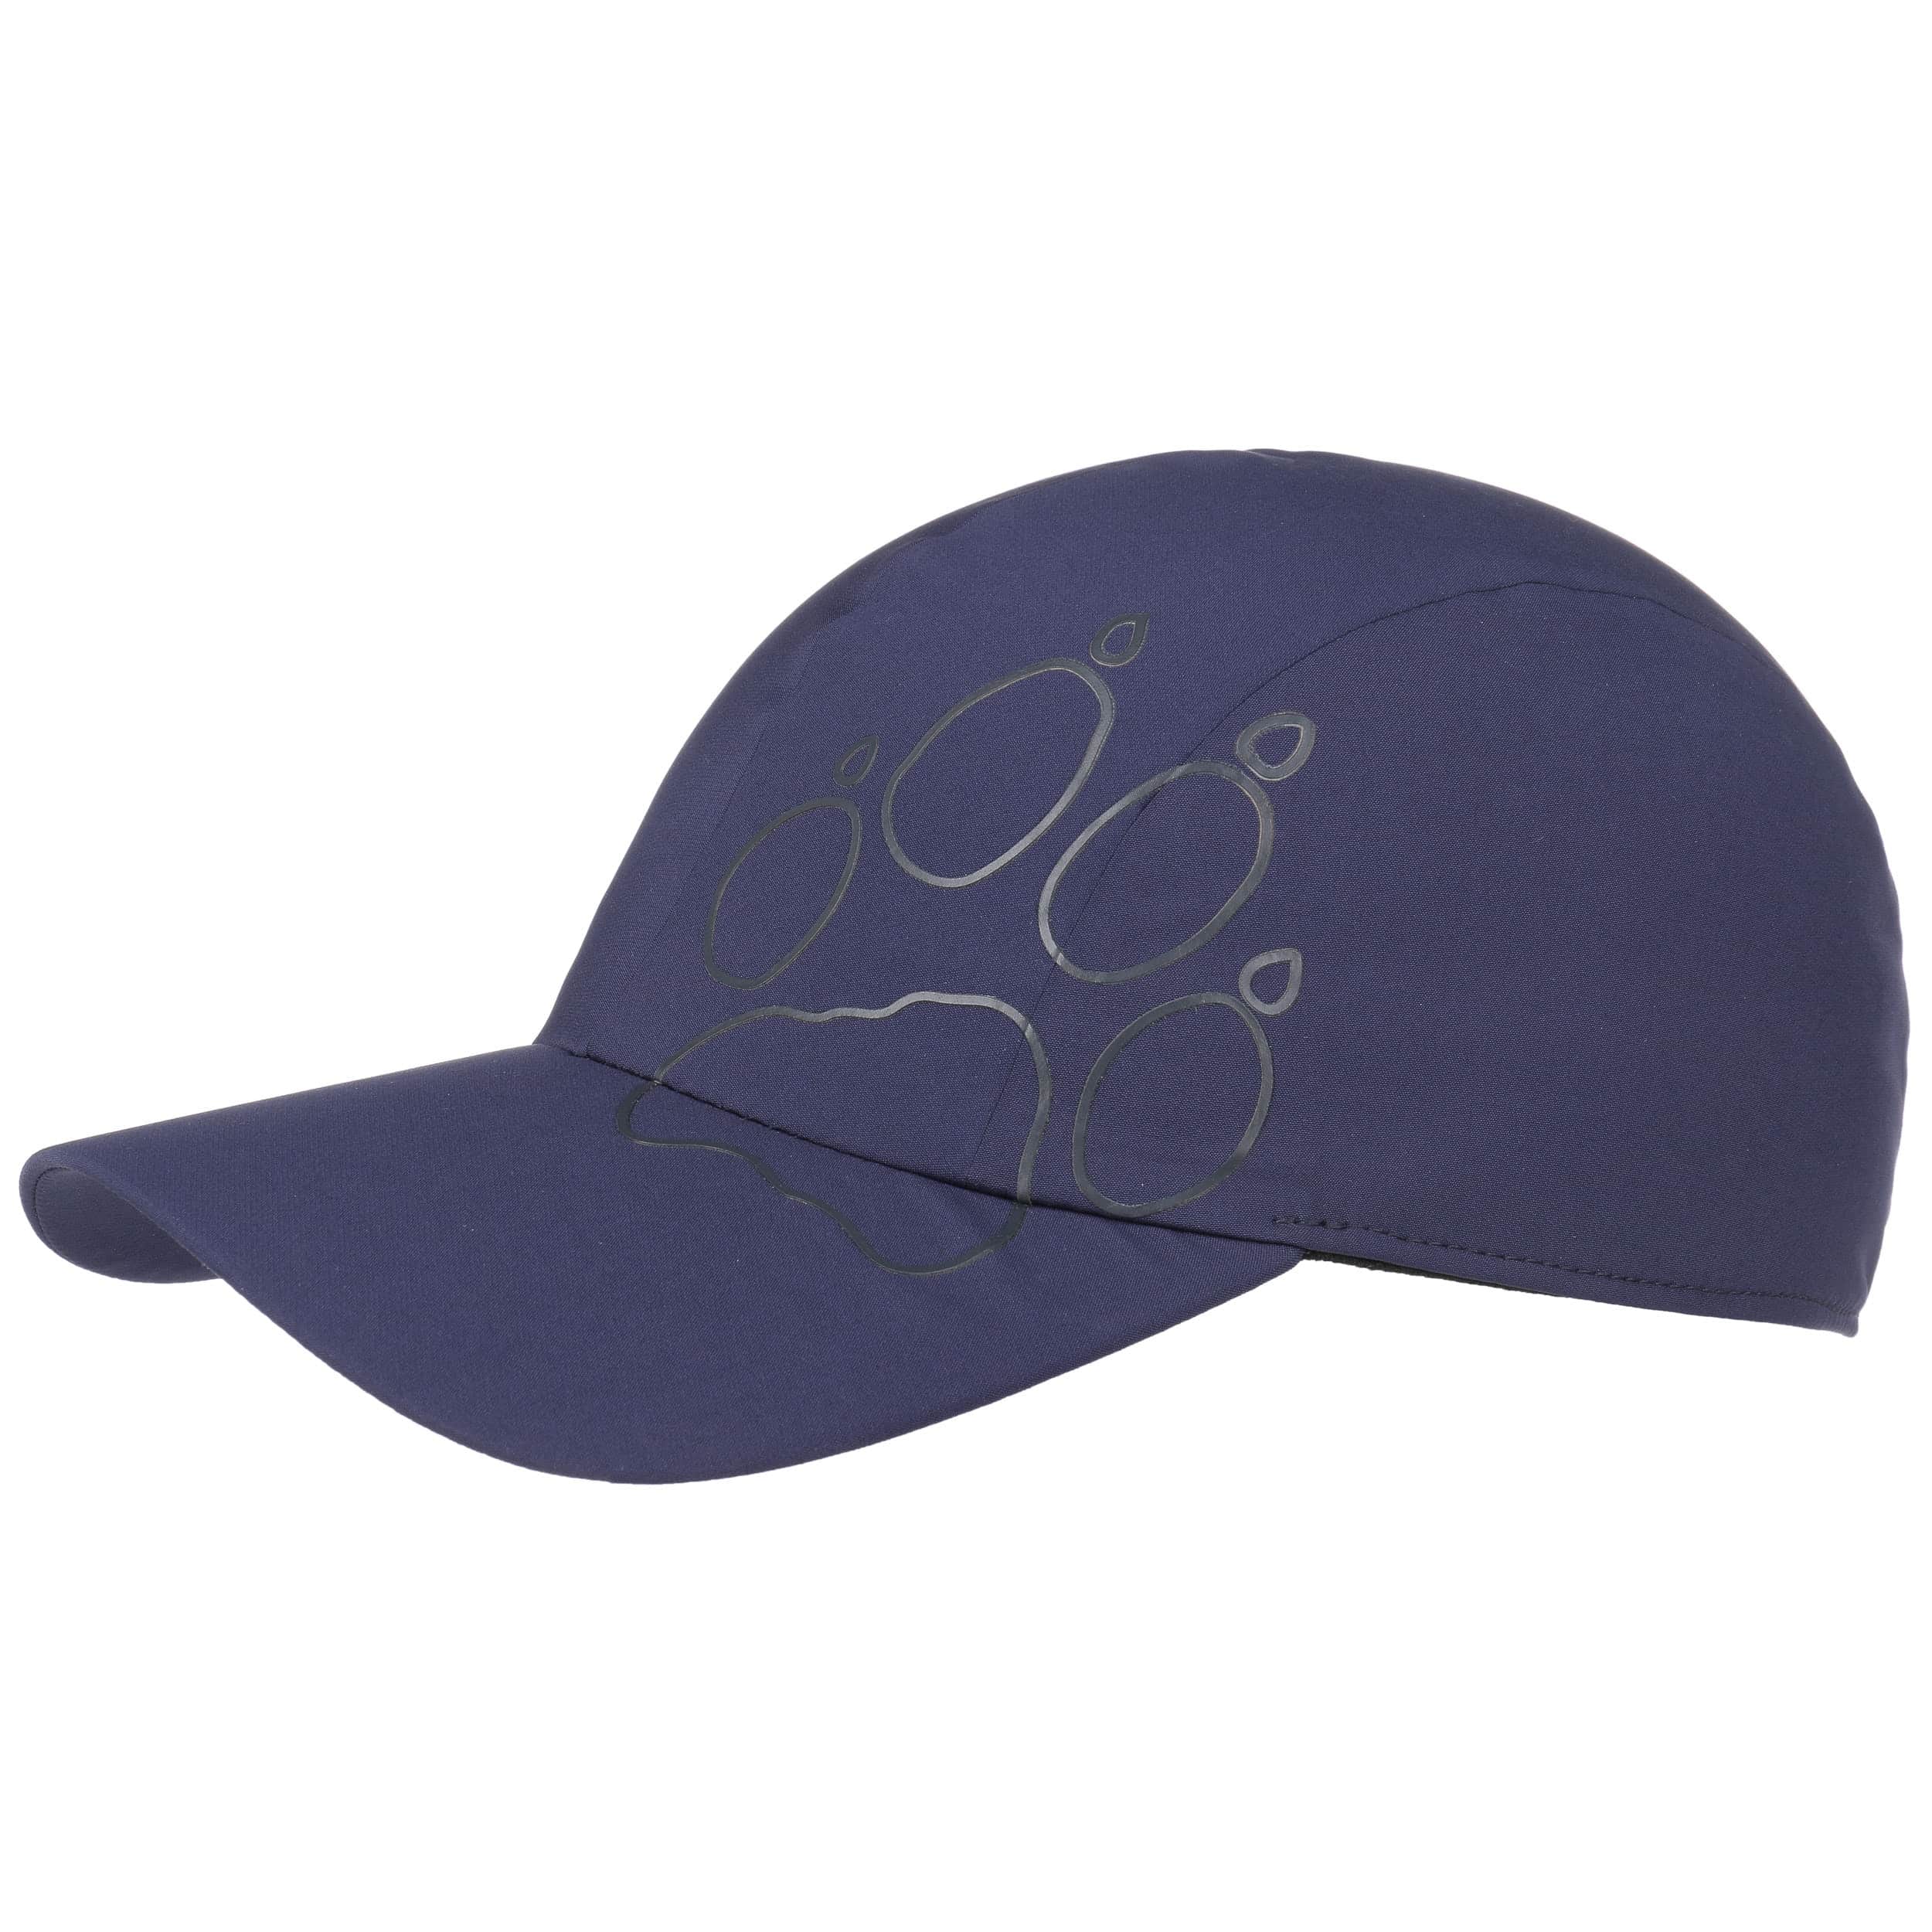 Activate Fold-Away Cap by Jack Wolfskin - 32,95 €